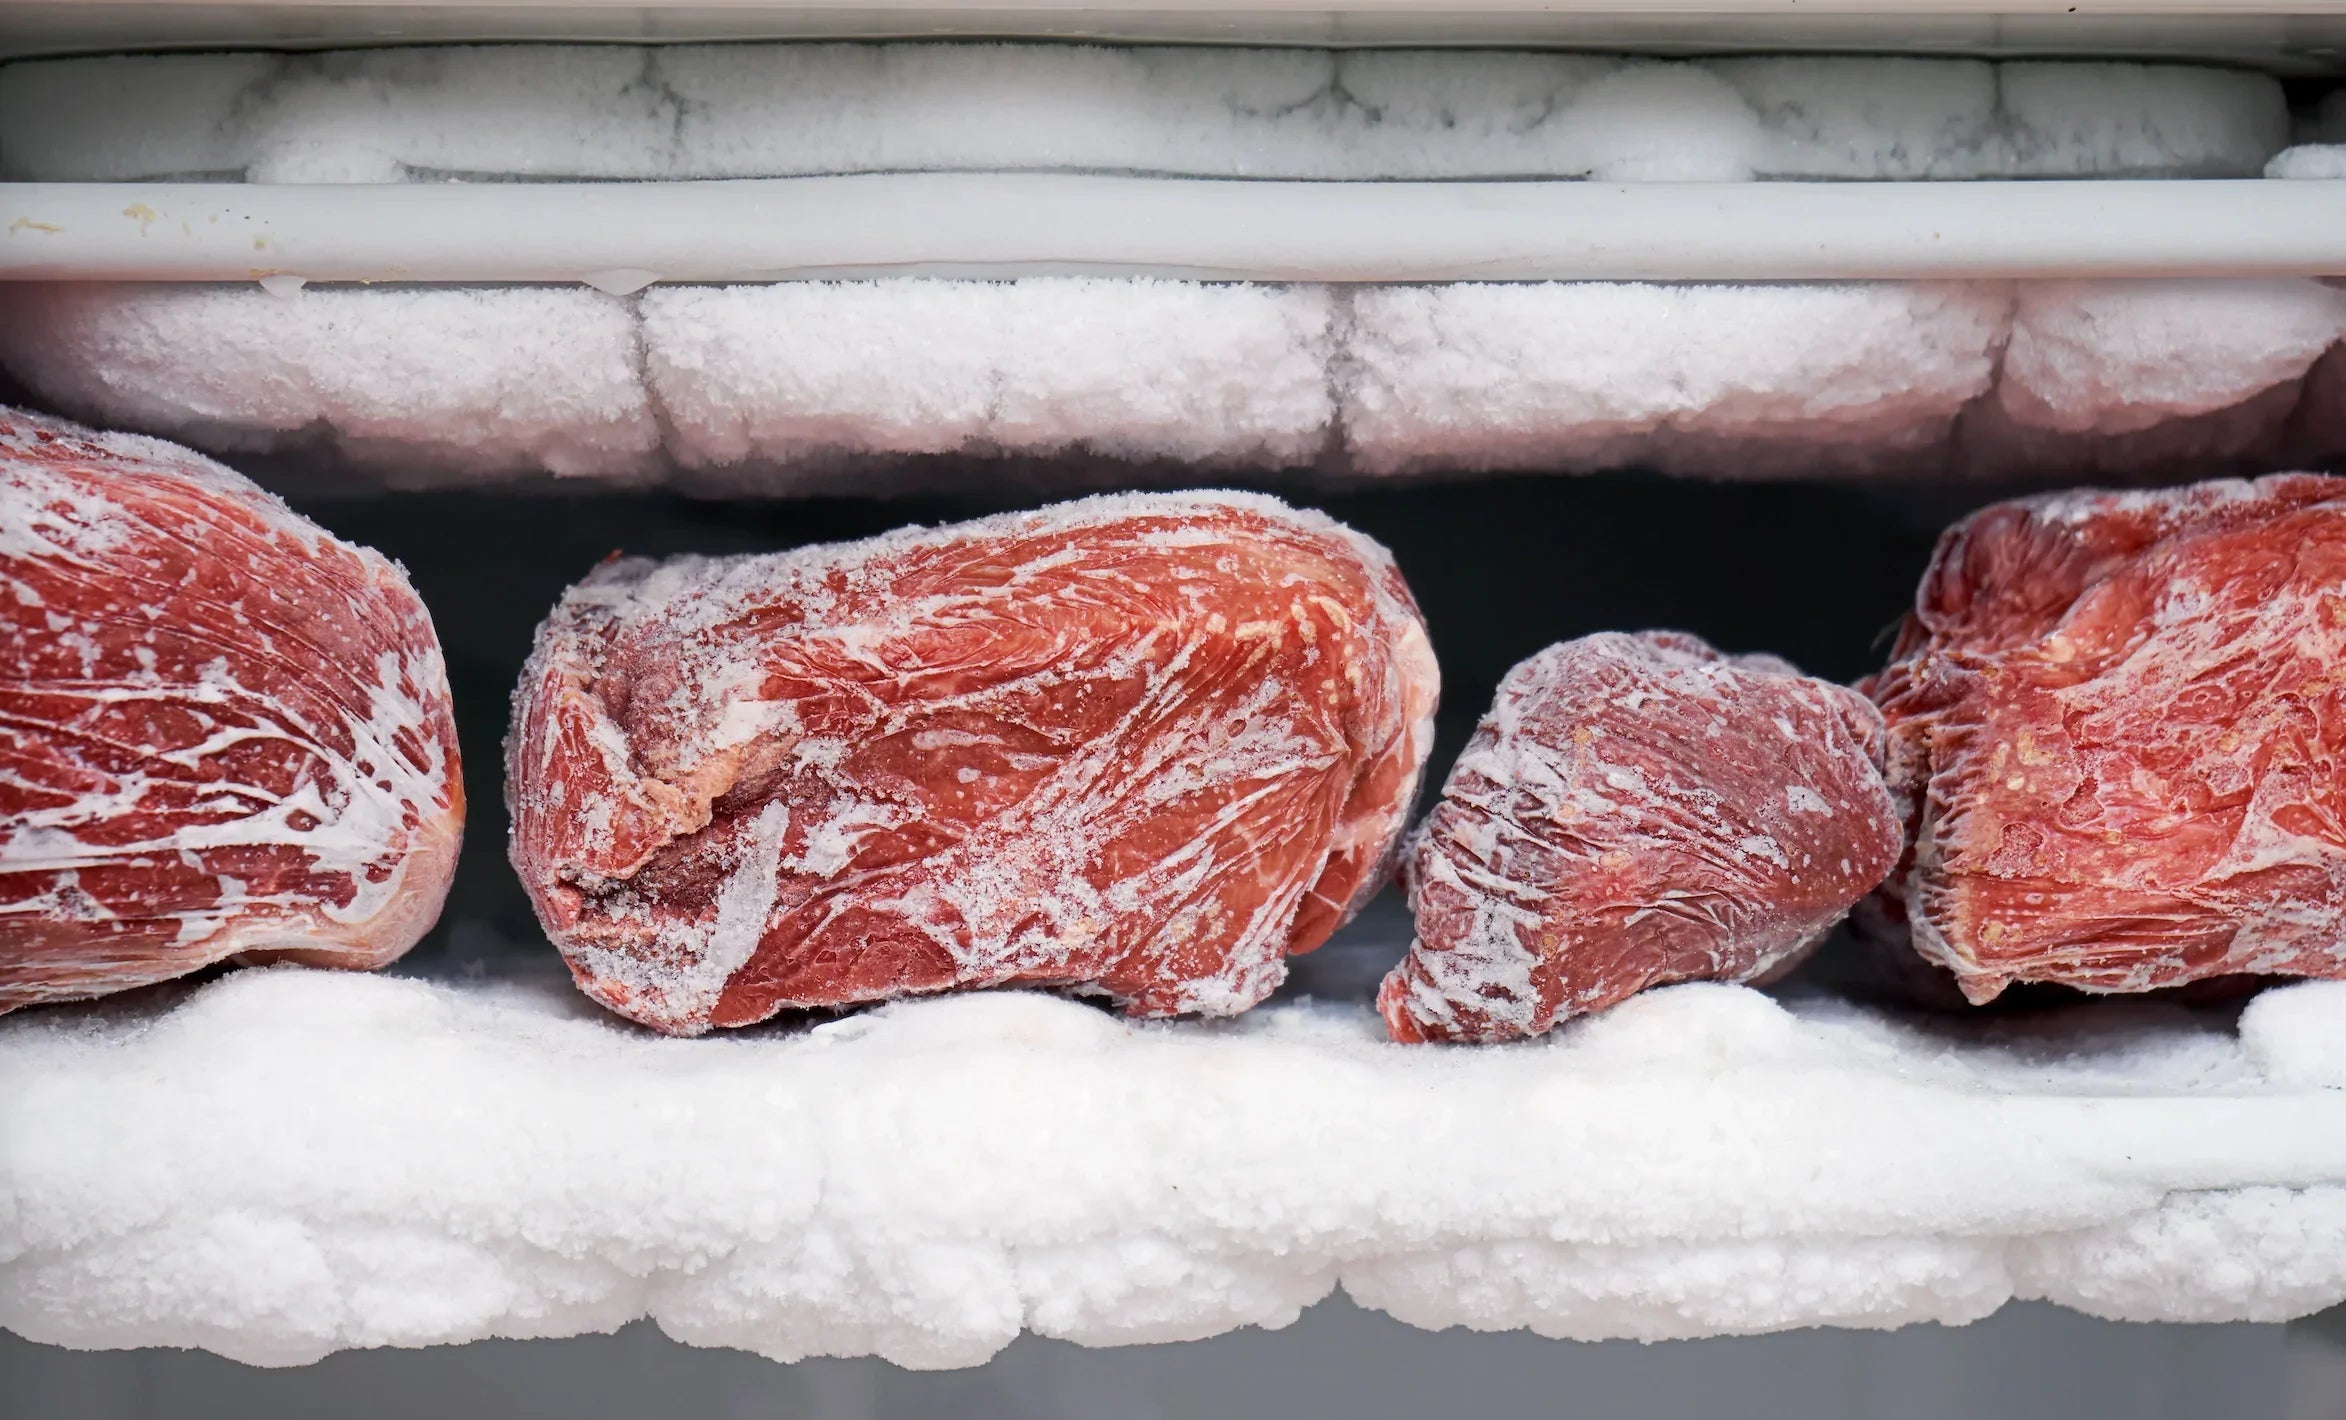 Tips for Freezing Game Meat